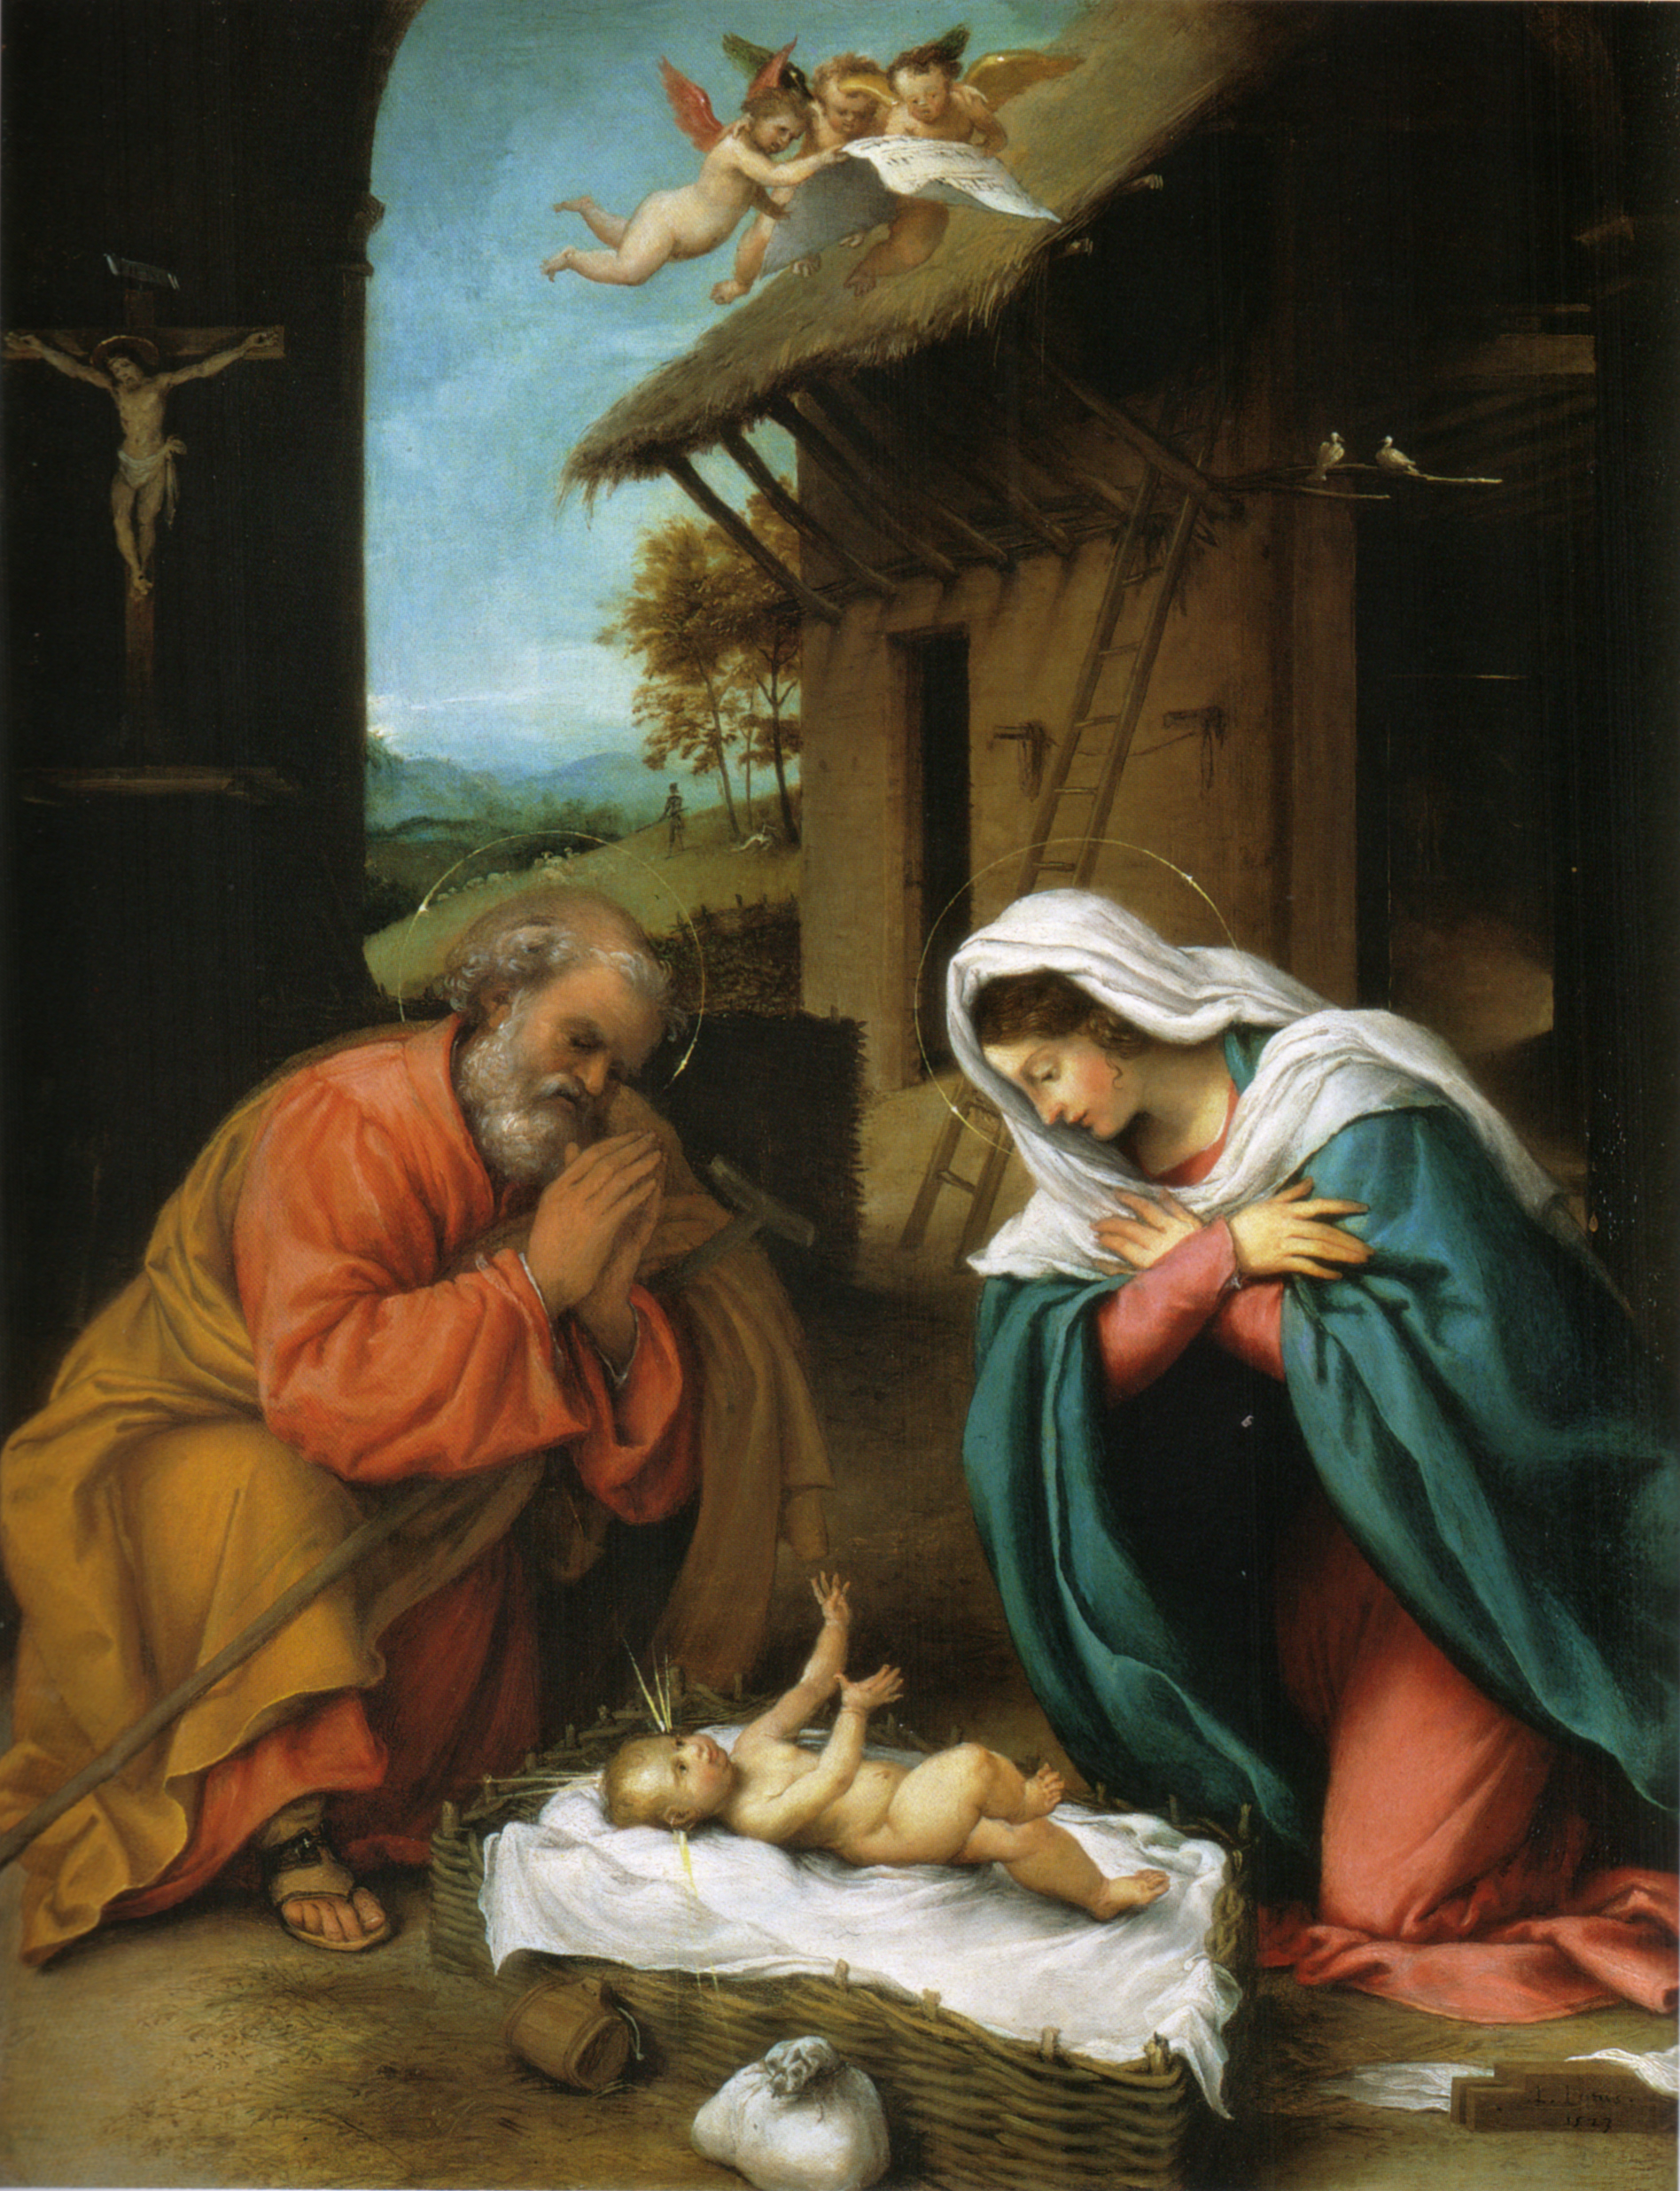 Painting of a nativity scene by Lorenzo Lotto